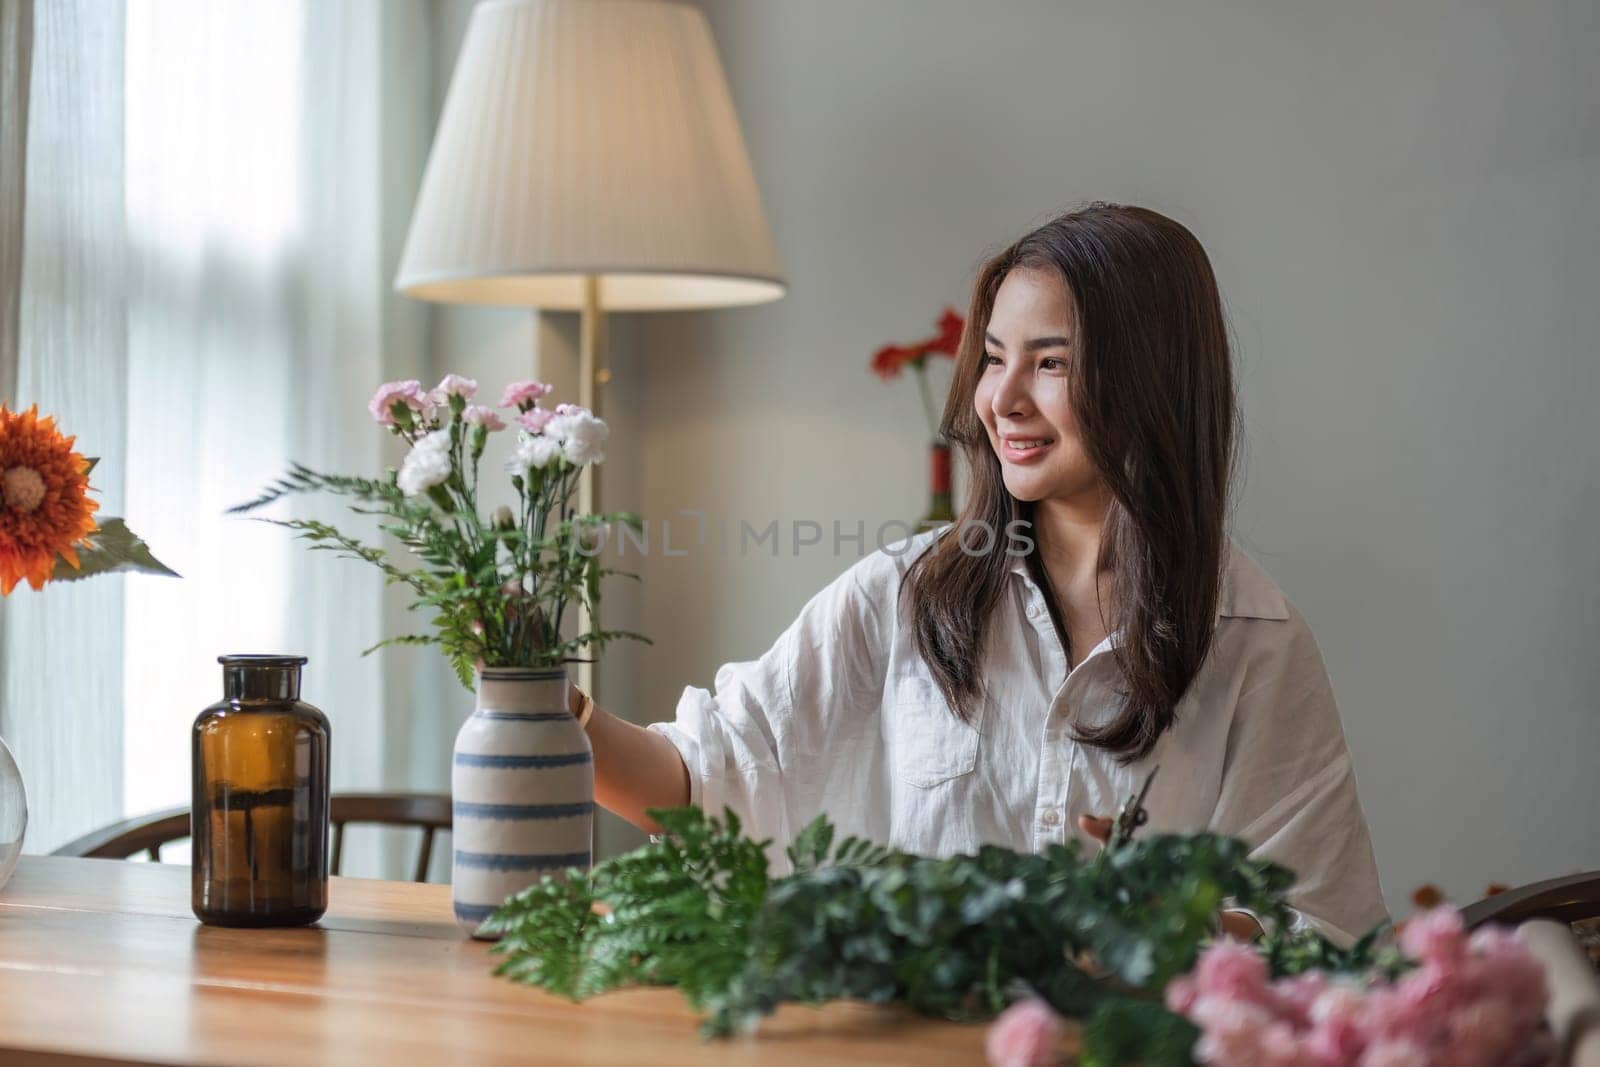 Attractive and happy young Asian woman enjoys arranging a vase with beautiful flowers in her minimal living room. Leisure and lifestyle concepts..